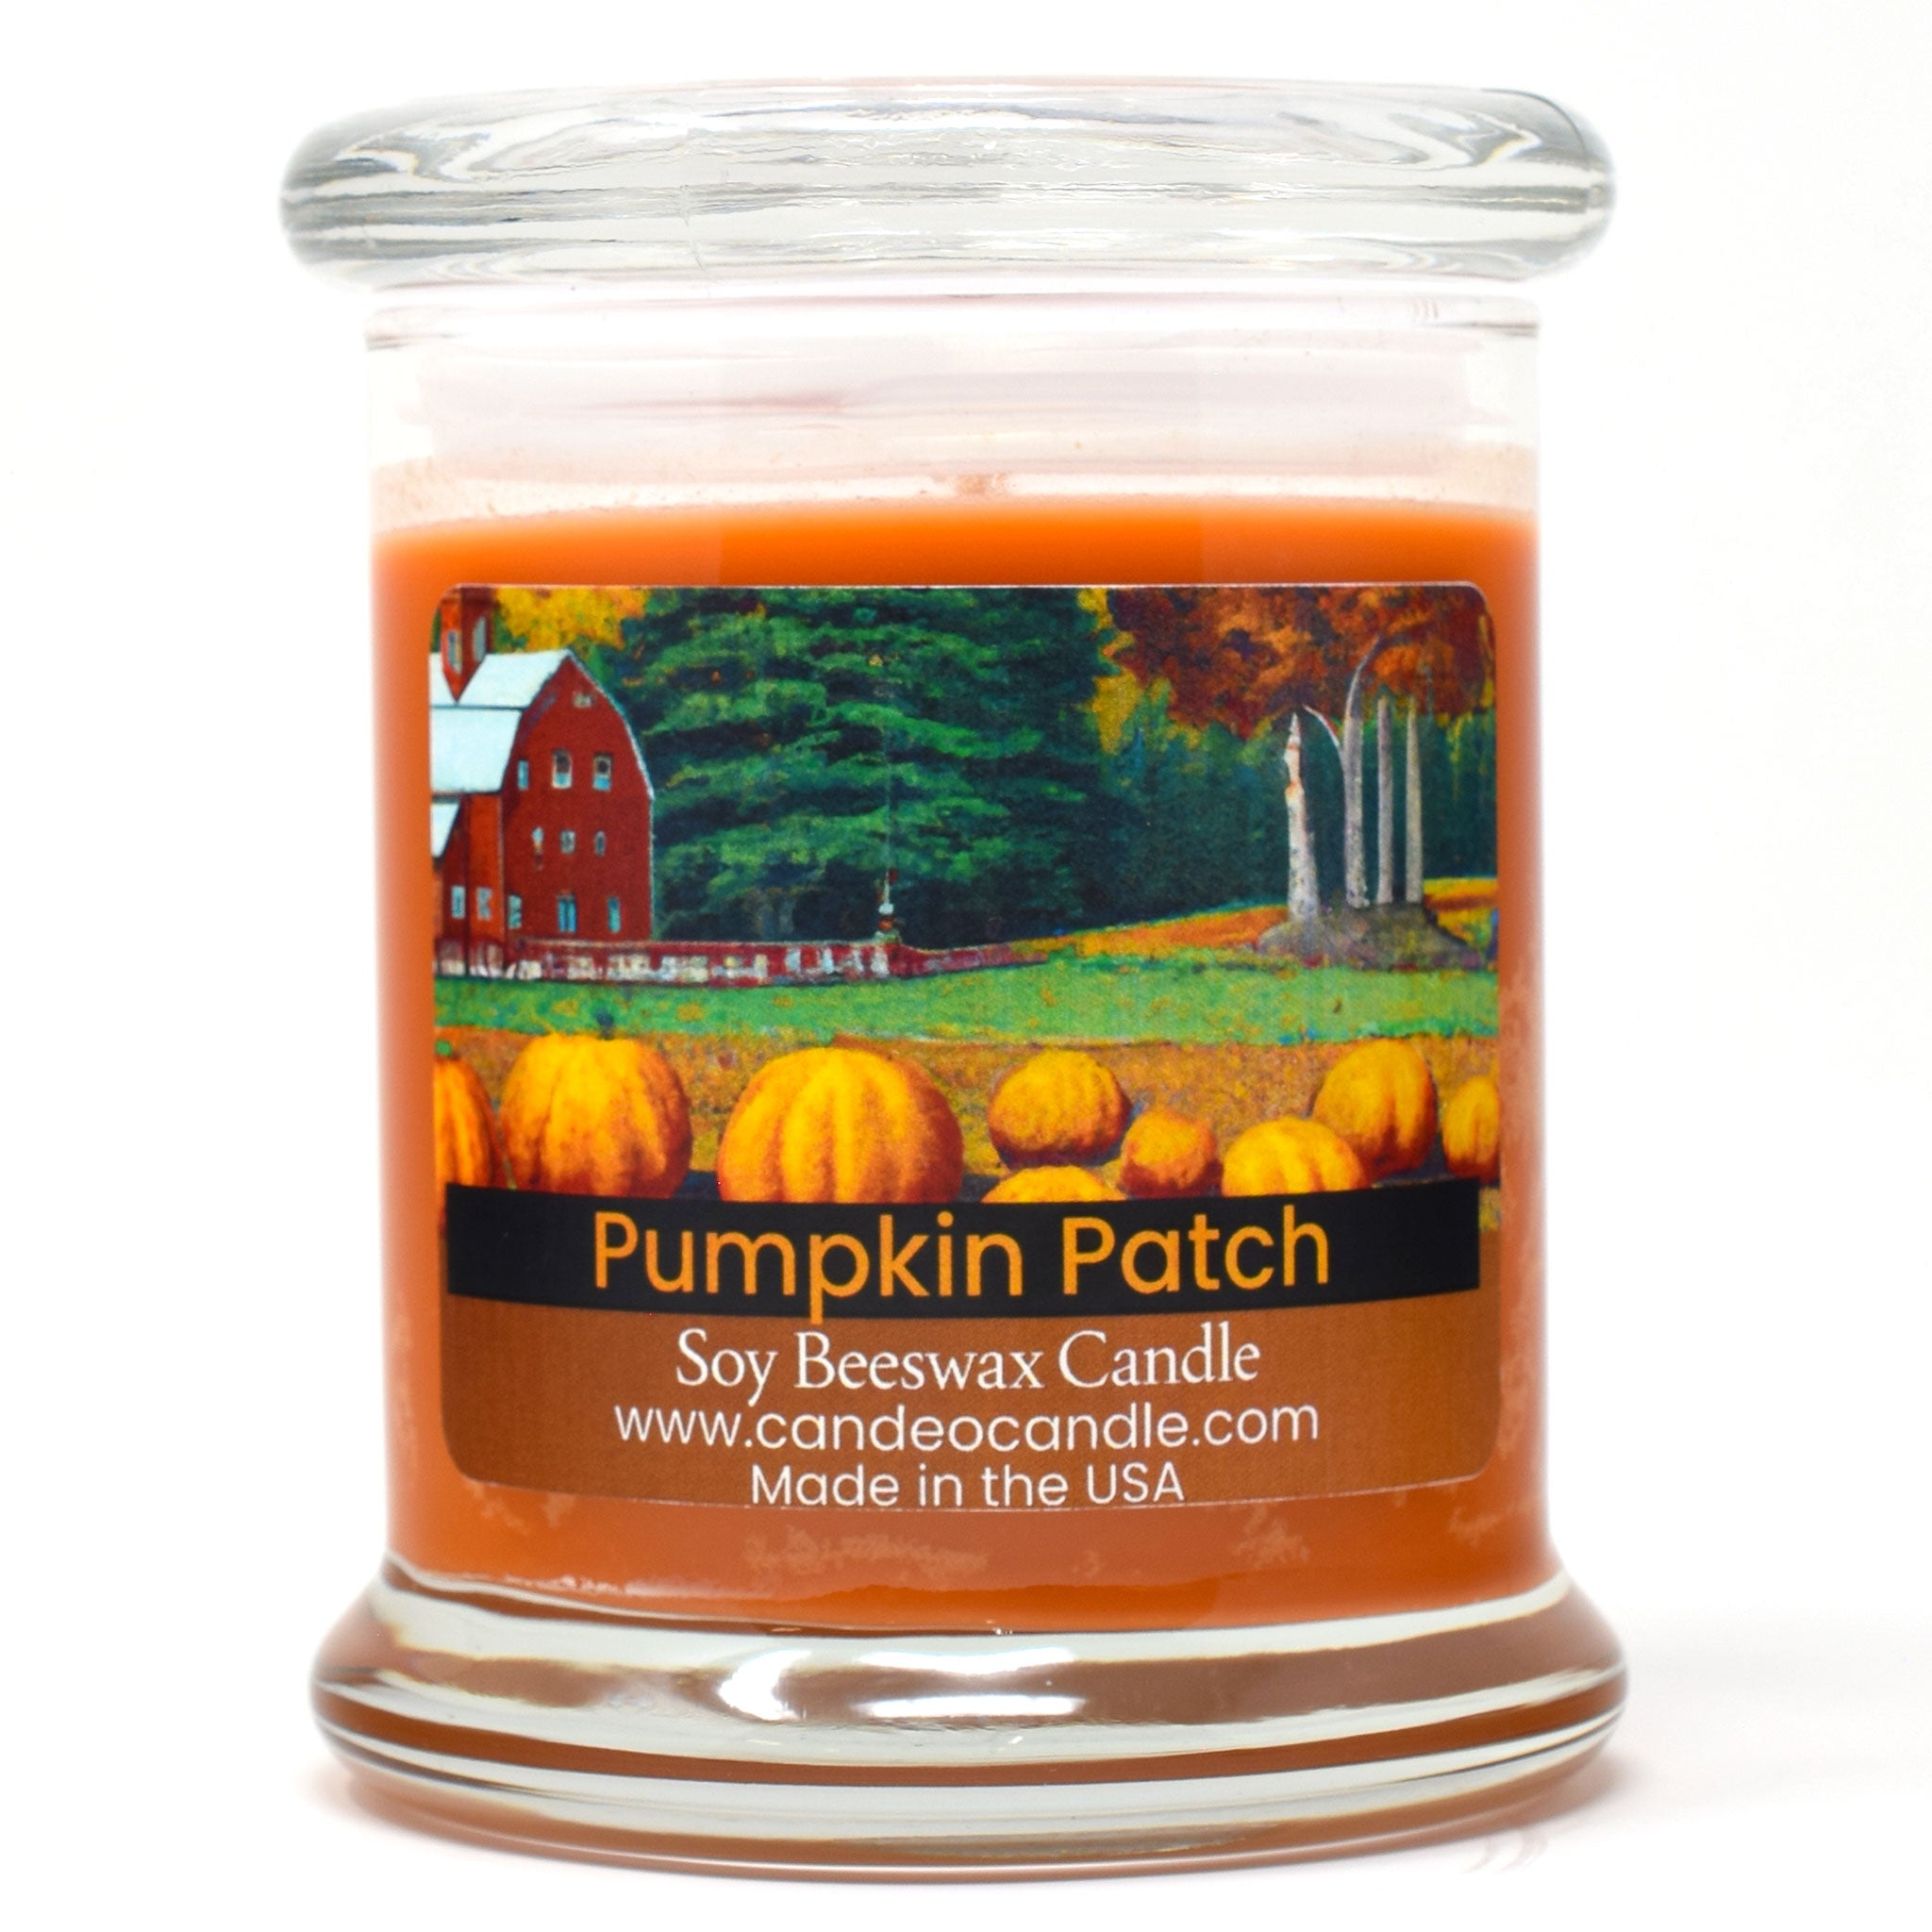 Pumpkin Patch, 9oz Soy Candle Jar - Candeo Candle